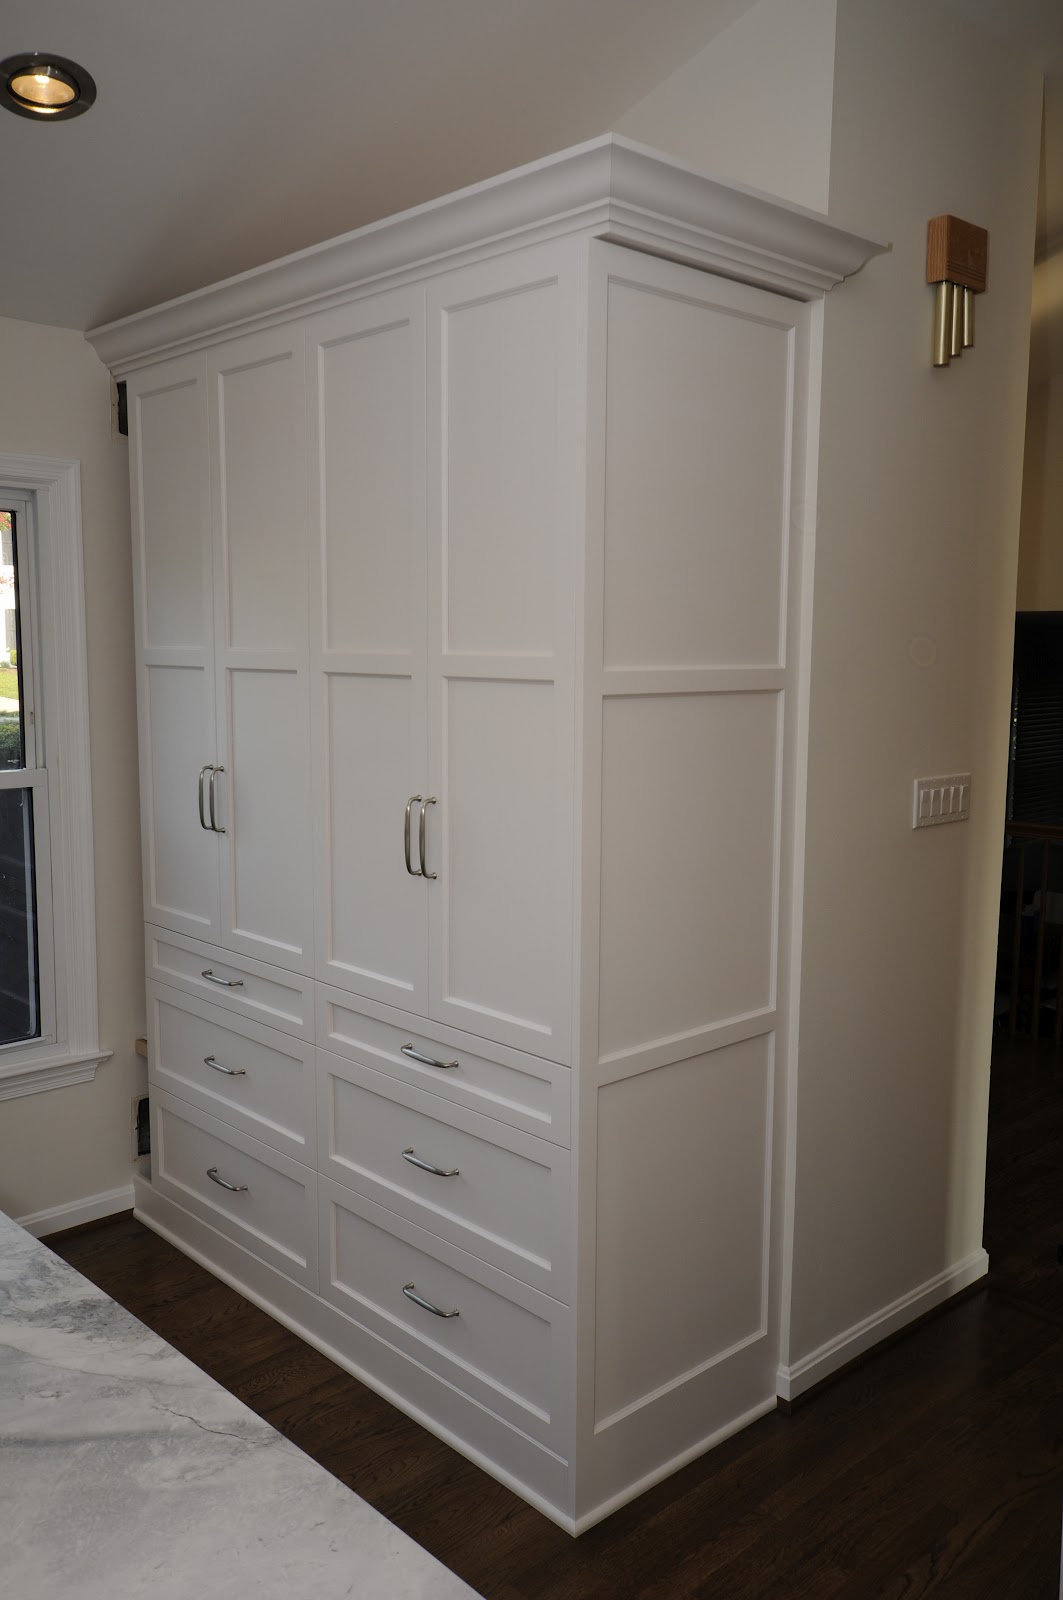 Cherry Hill Cabinetry: Soapstone and White Painted ...